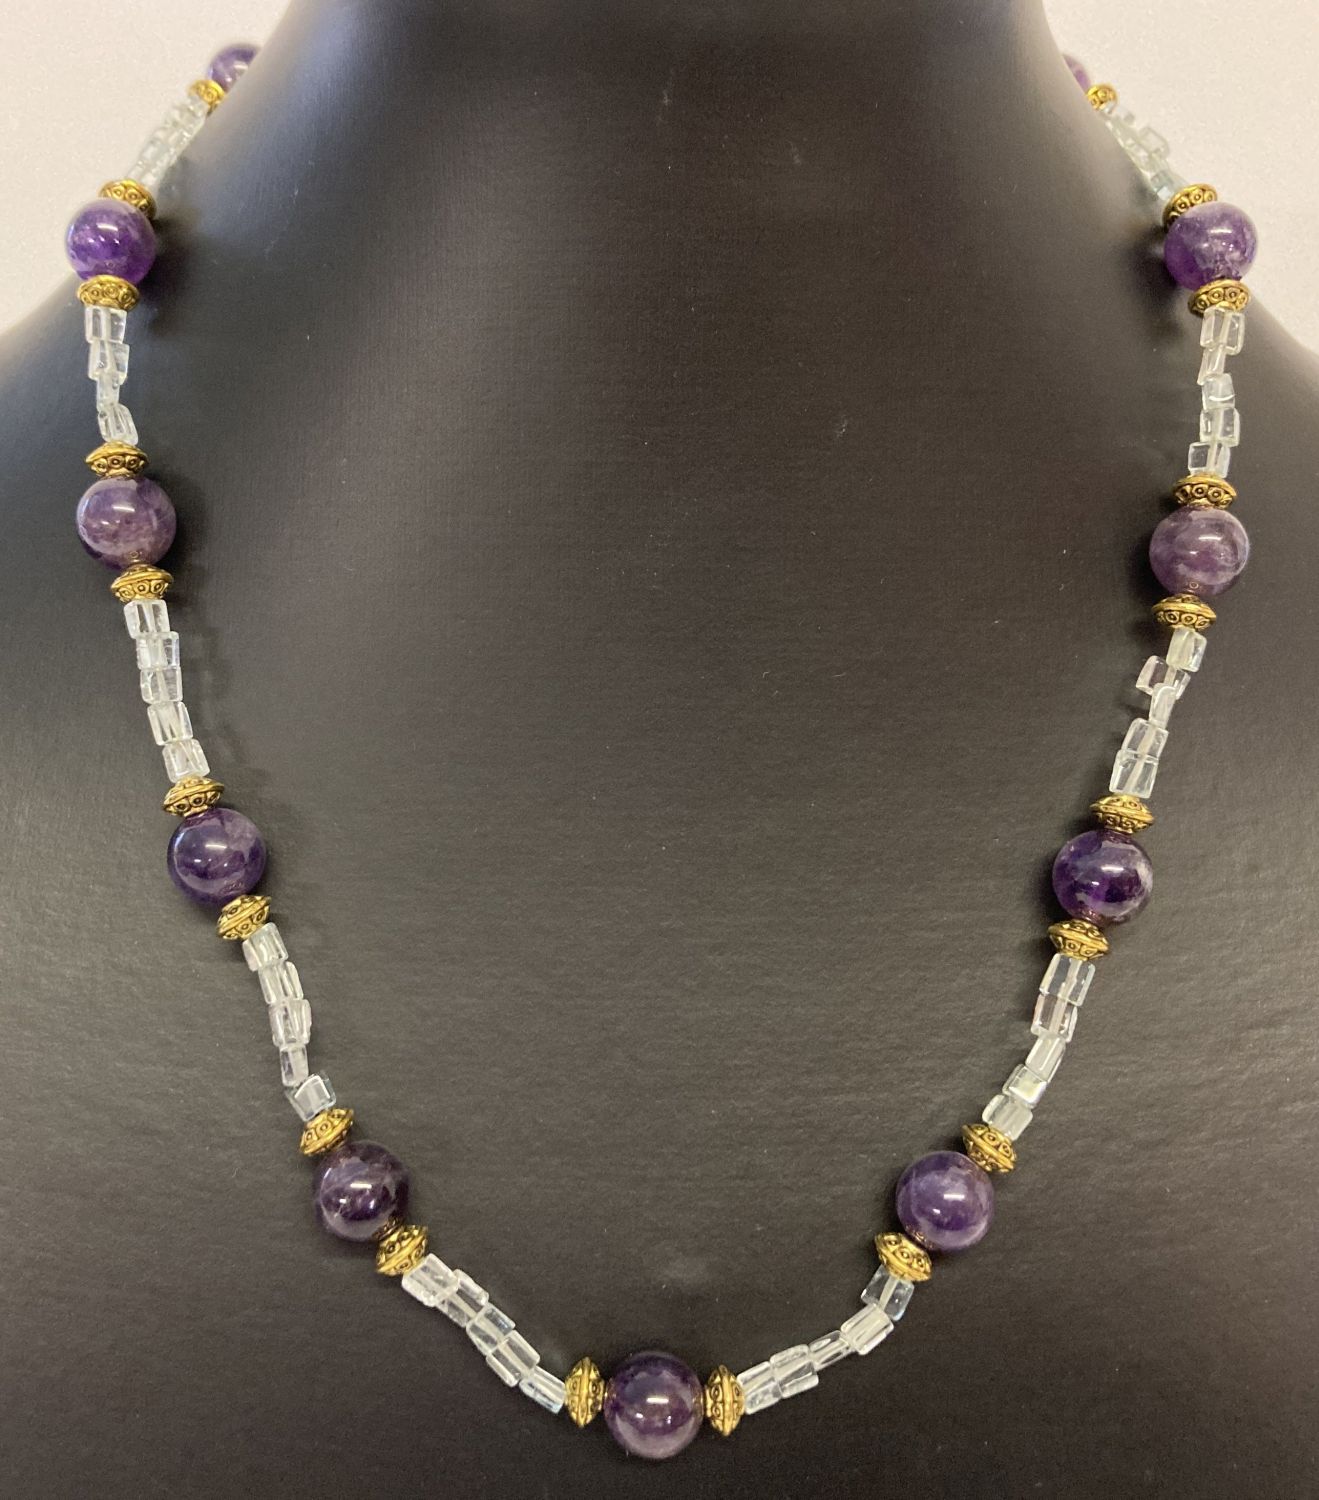 A 17" amethyst and aquamarine beaded necklace with gold tone S shaped hook clasp and spacer beads.